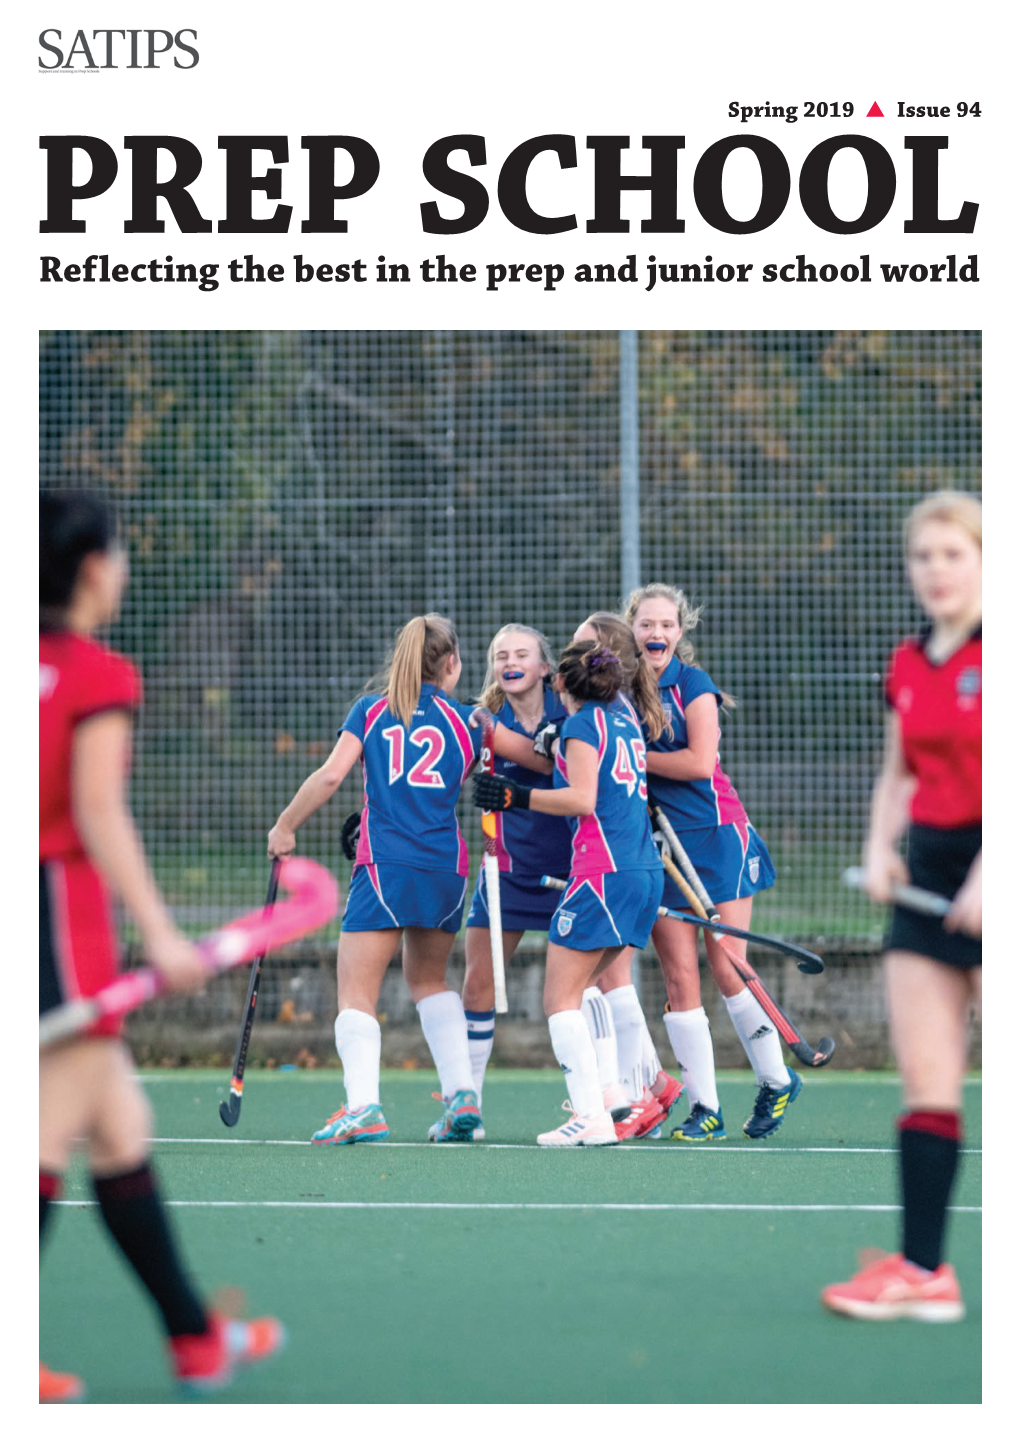 Reflecting the Best in the Prep and Junior School World